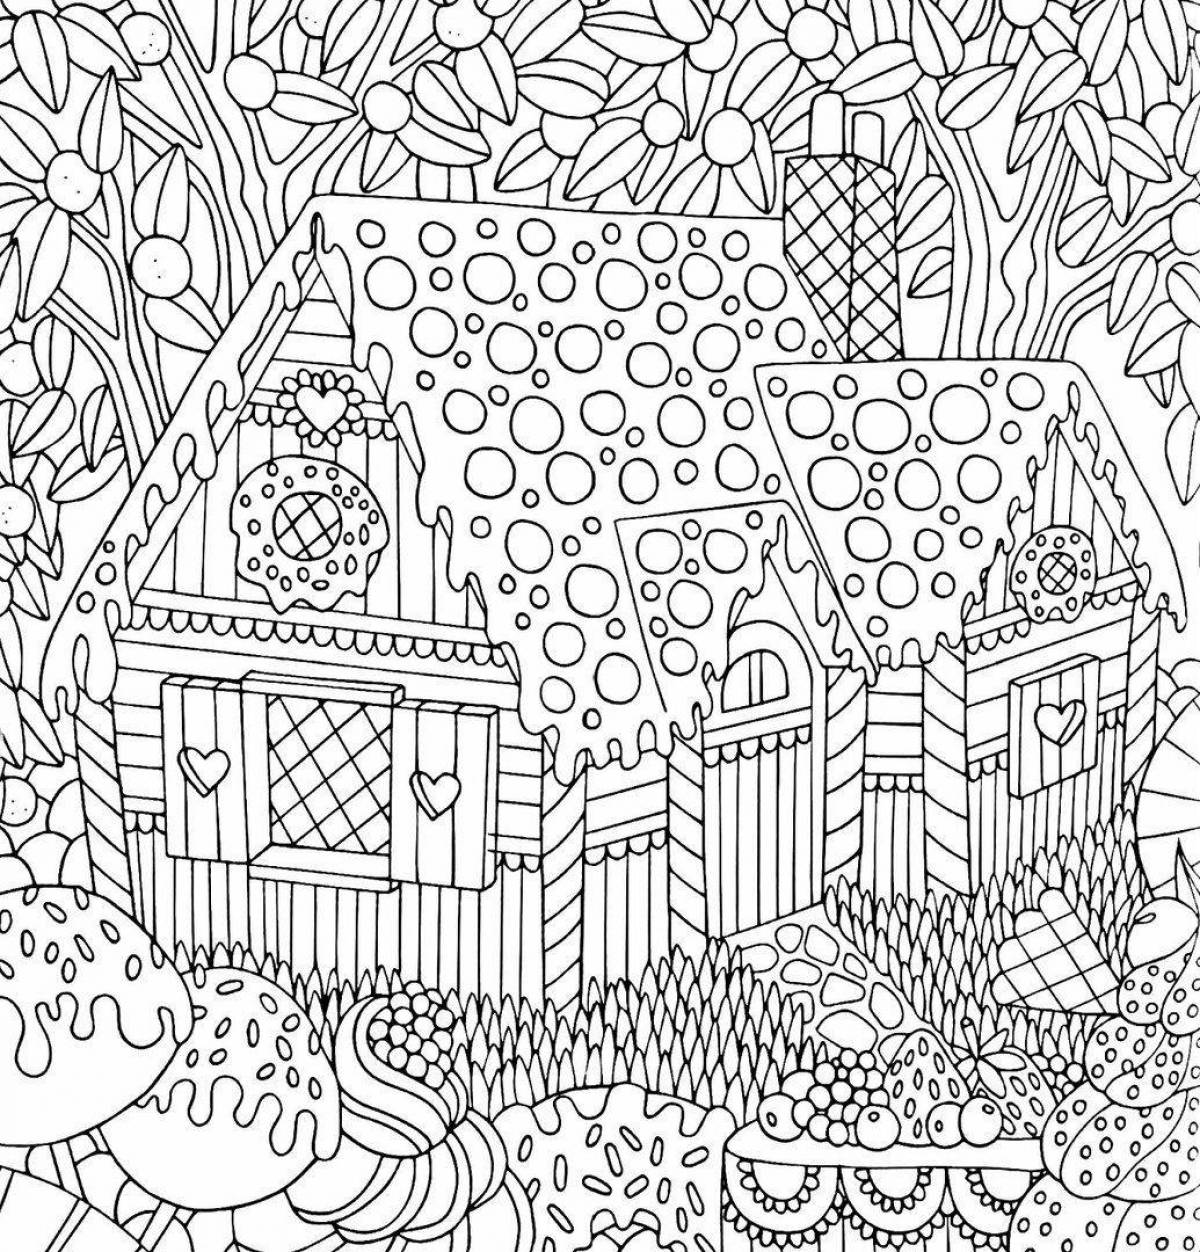 Delightful coloring book for all adults